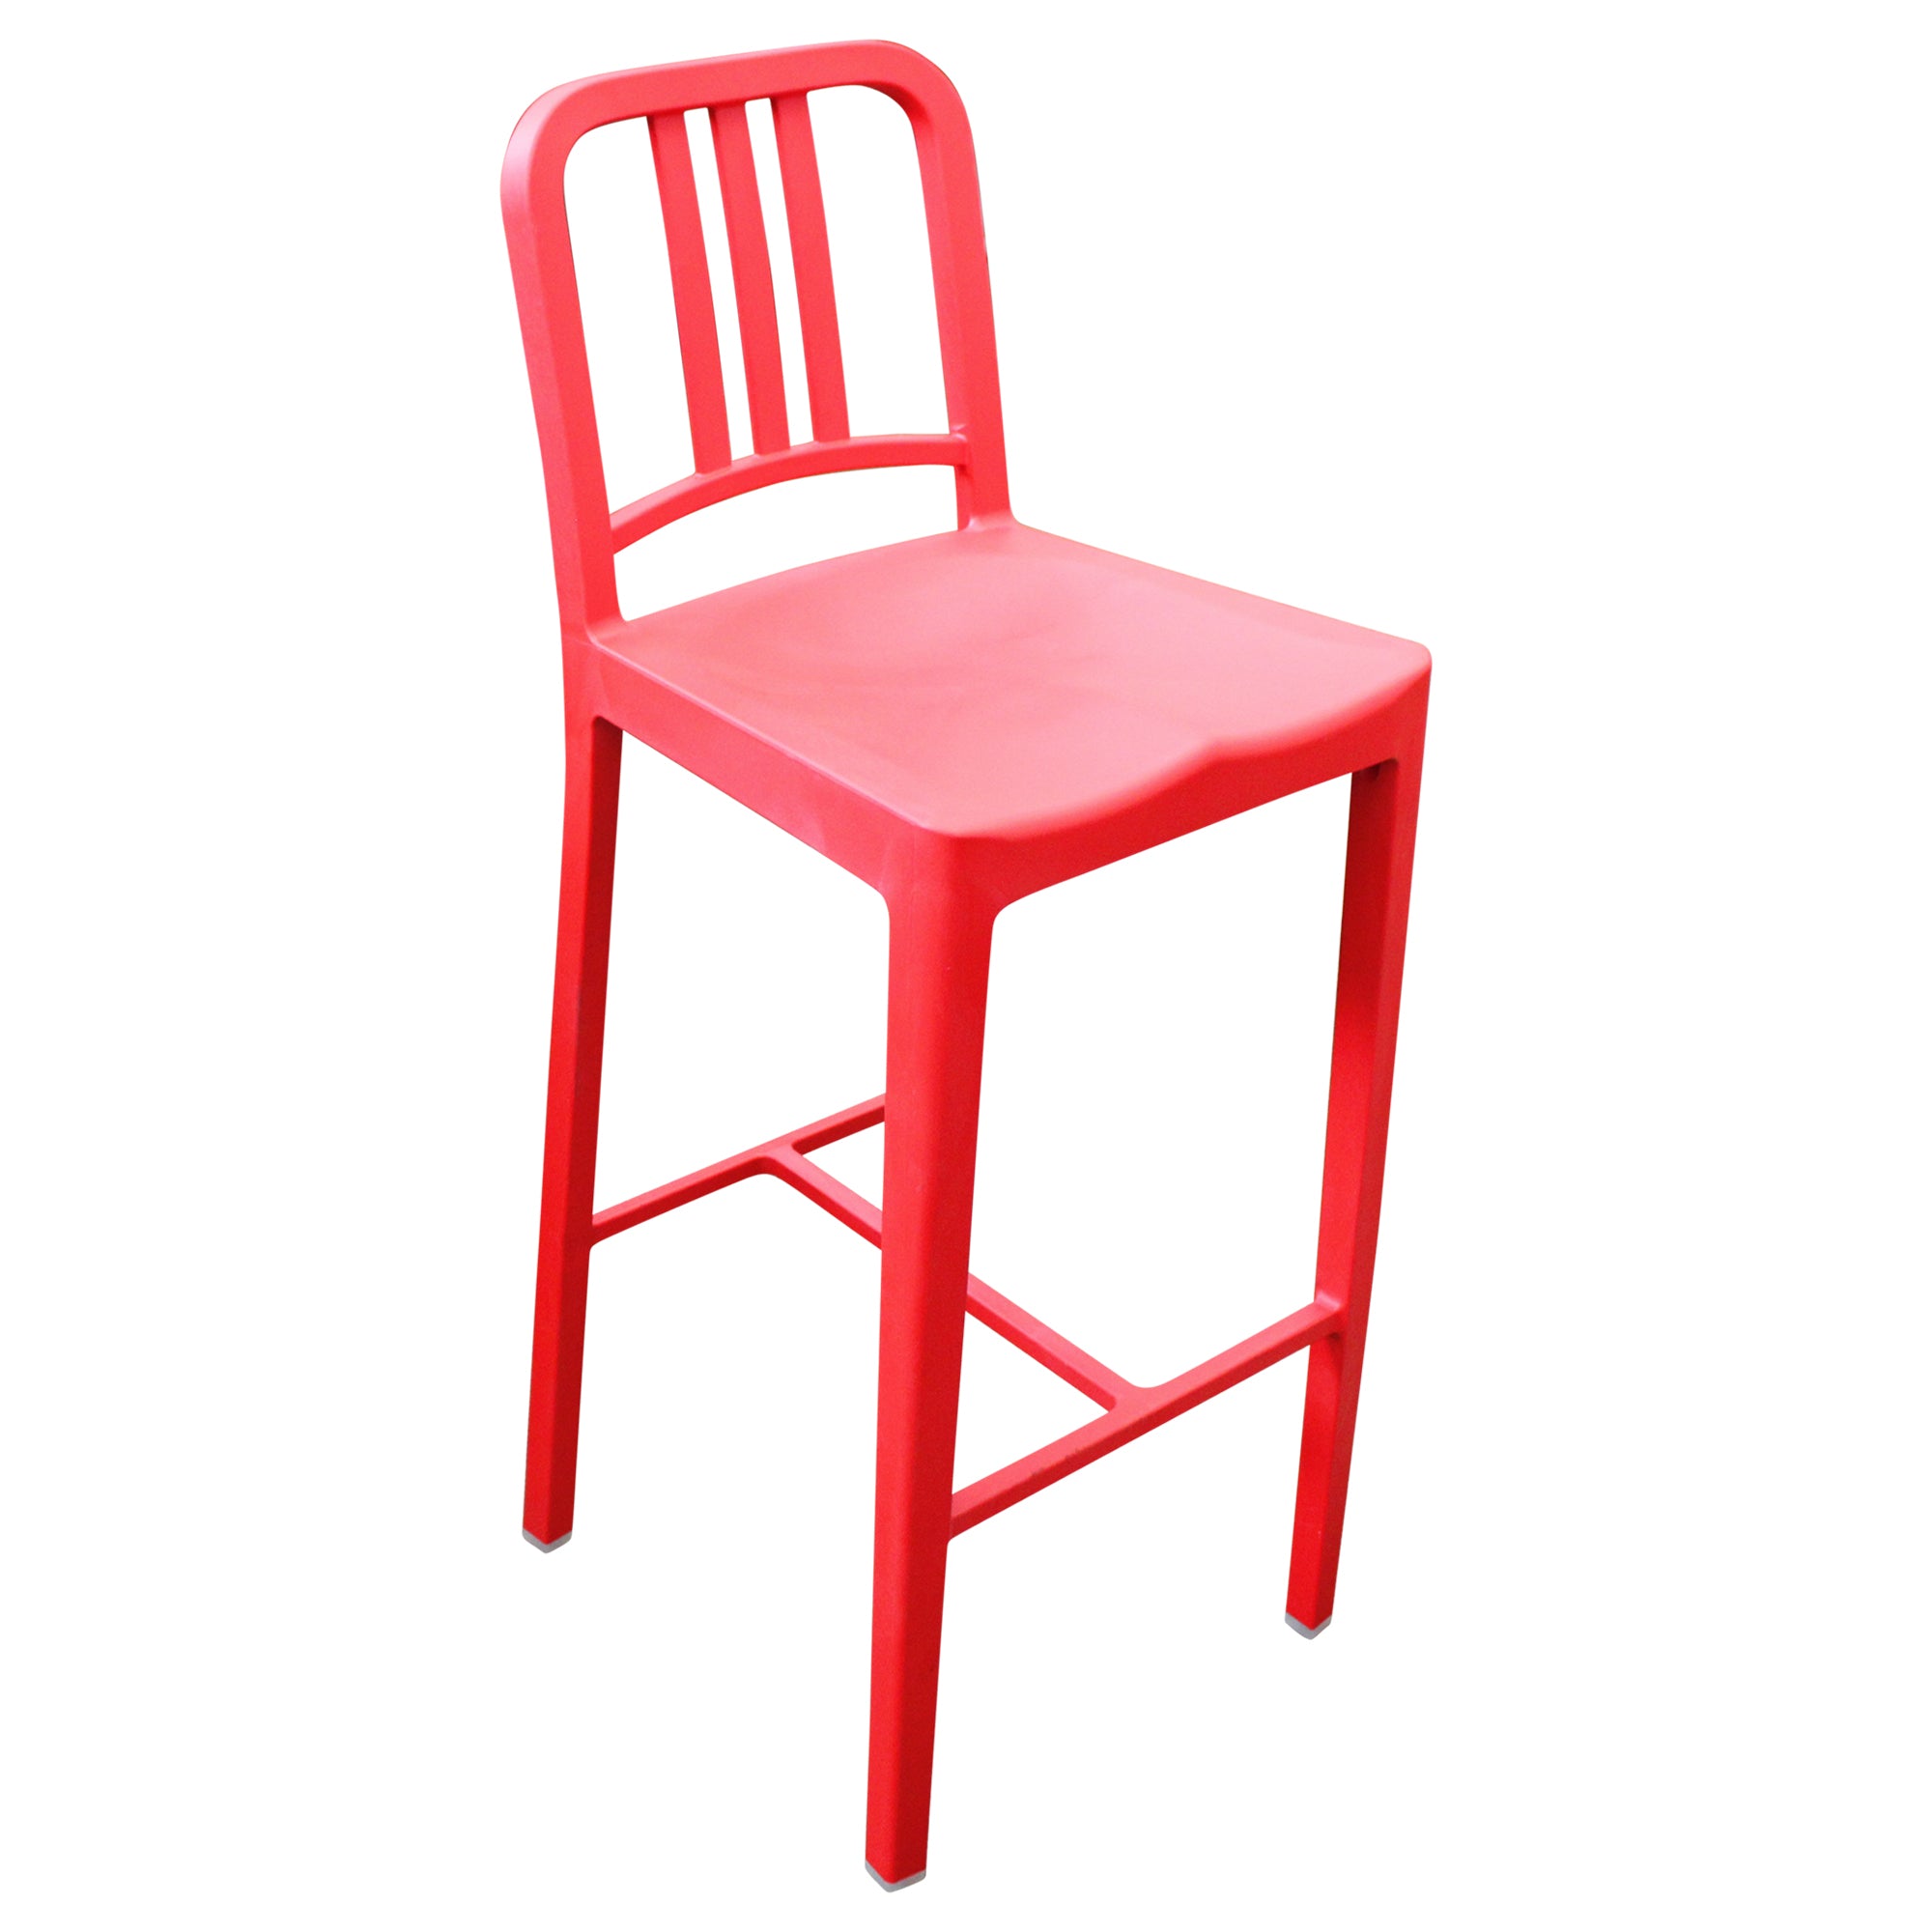 Emeco 111 Navy Barstool - Red - Preowned